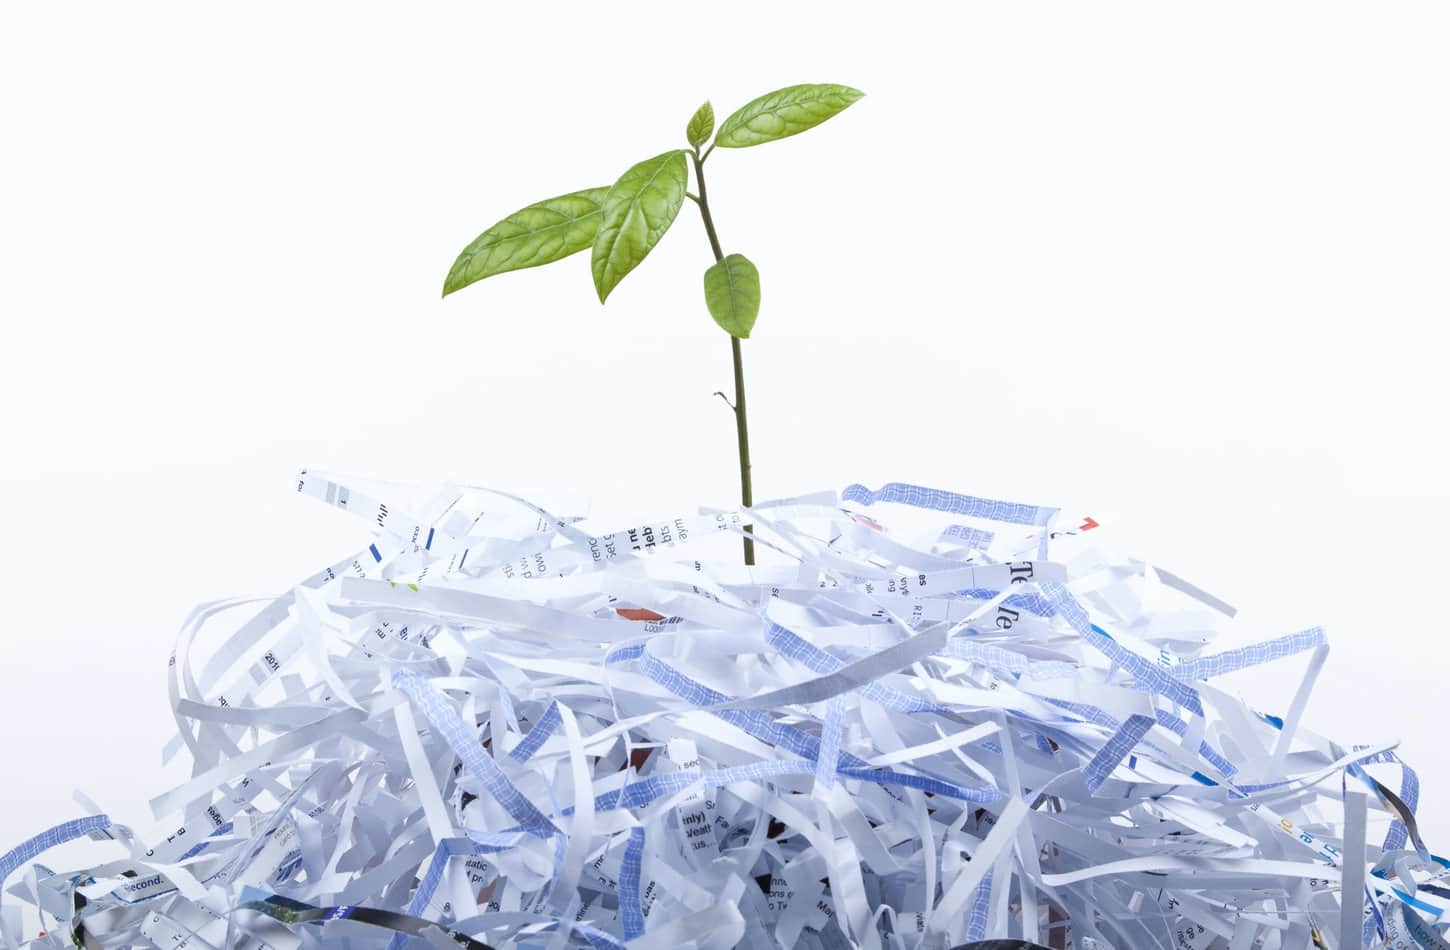 The Top 5 Ways to Use Shredded Paper in the Garden 